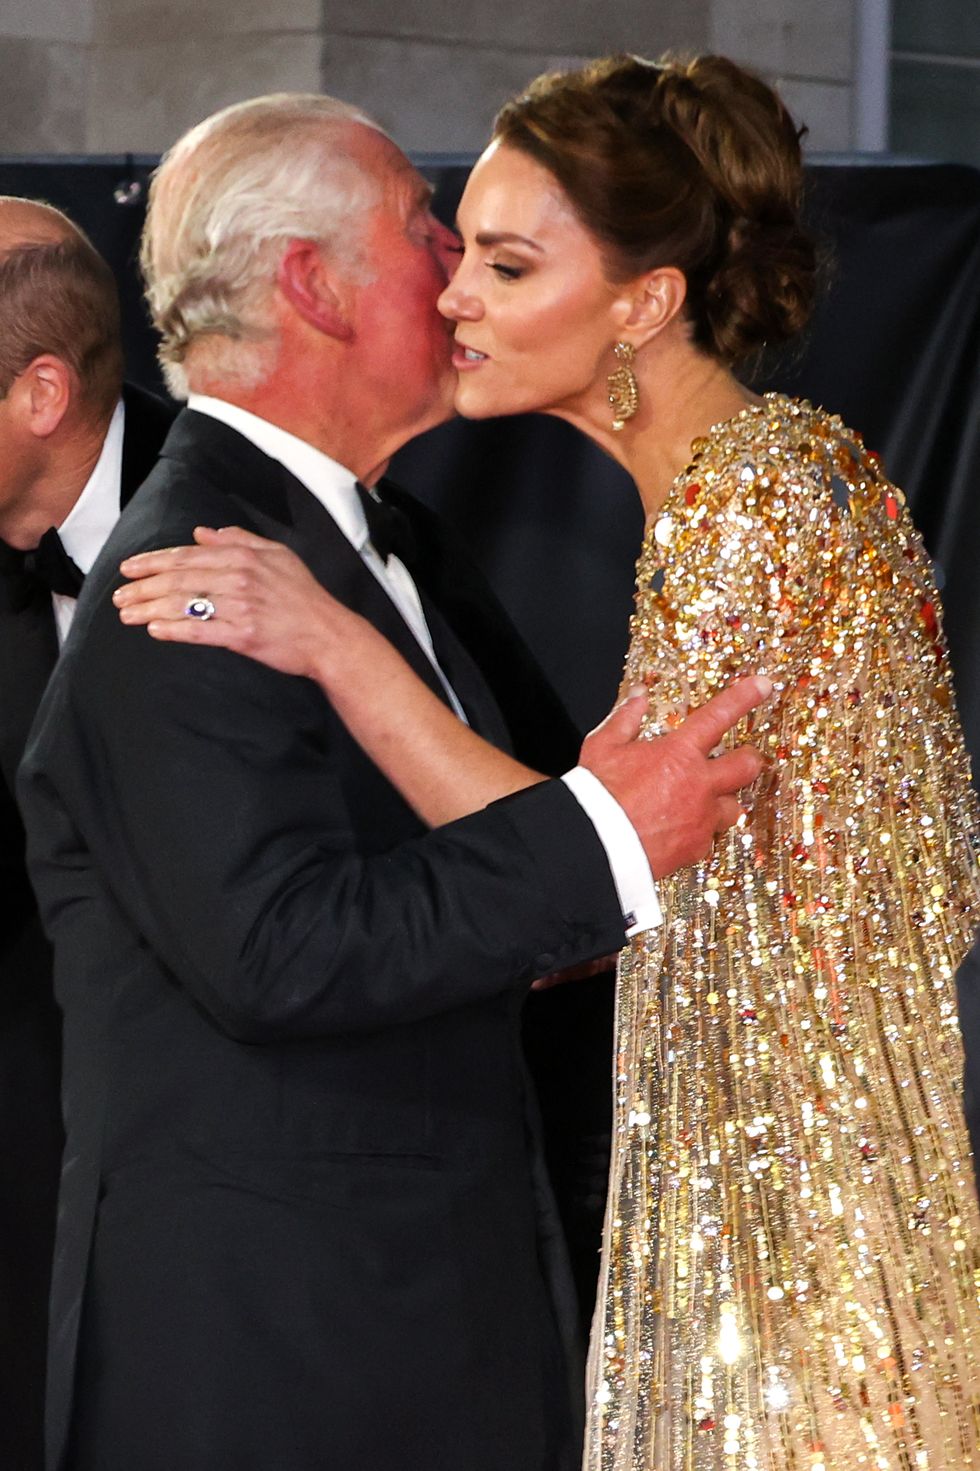 britains prince charles, prince of wales l kisses britains catherine, duchess of cambridge as they arrive for the world premiere of the james bond 007 film no time to die at the royal albert hall in west london on september 28, 2021 celebrities and royals walk the red carpet in central london on tuesday for the star studded but much delayed world premiere of the latest james bond film, no time to die photo by chris jackson pool afp photo by chris jacksonpoolafp via getty images